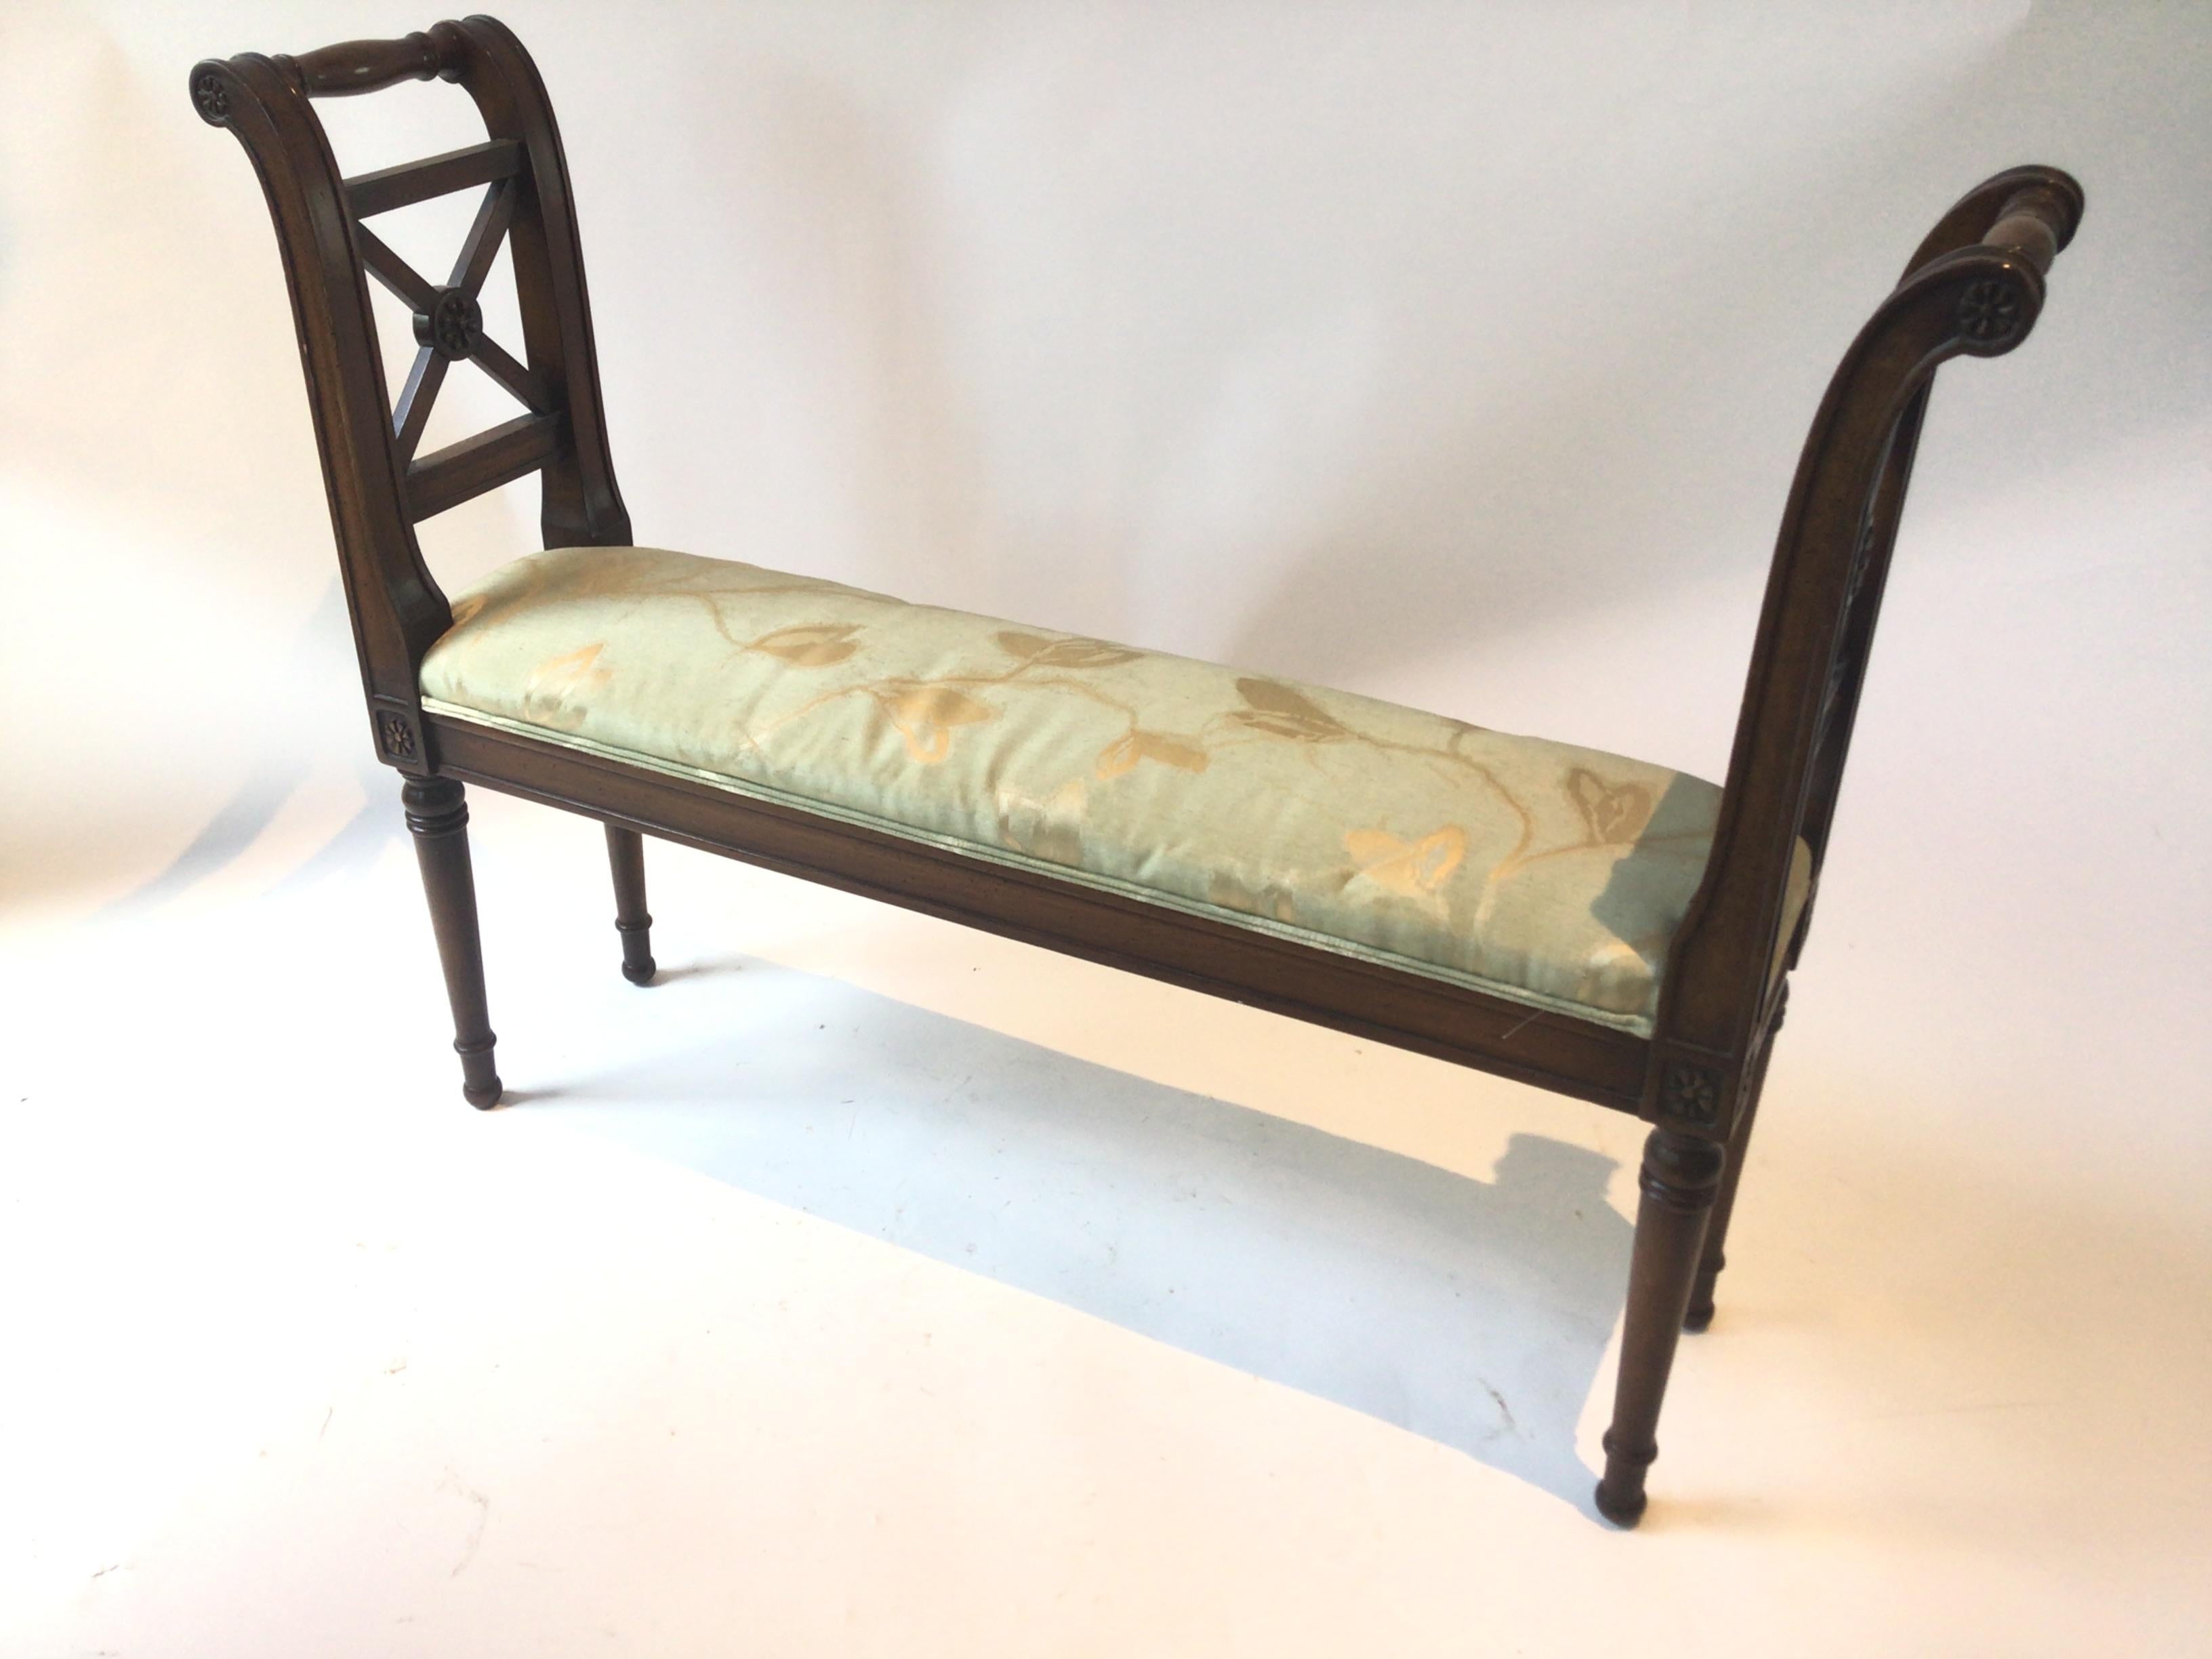 1960s Narrow Louis XVI French bench. Needs reupholstering. 
Can also be shipped via UPS.